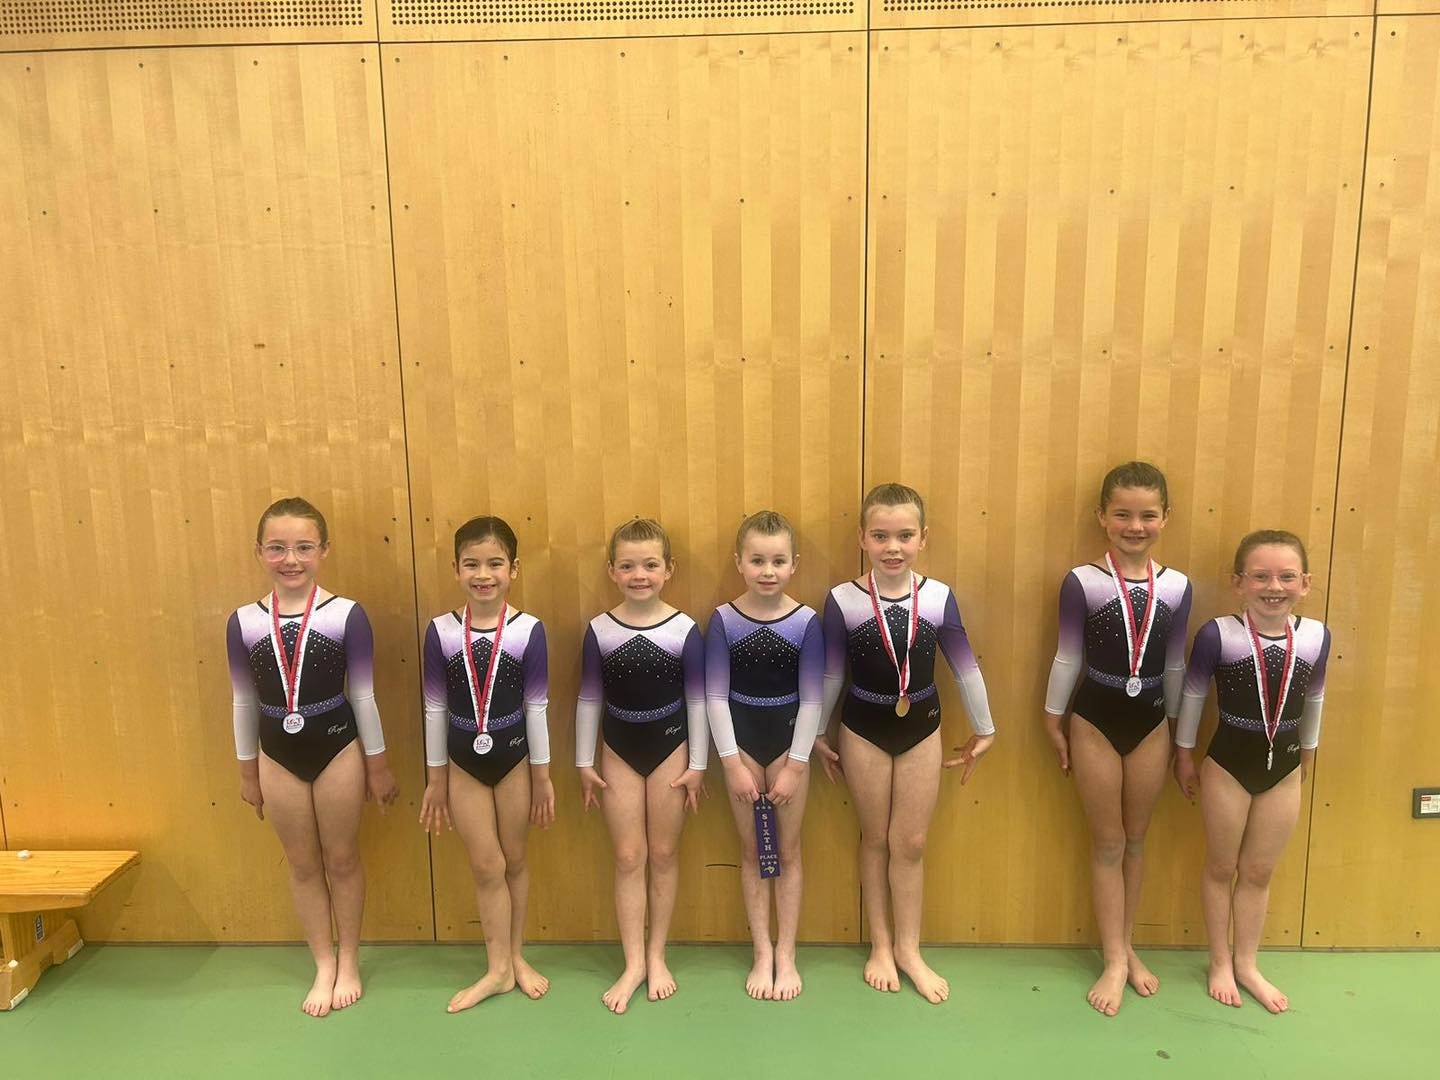 AMAZING results to start the morning! 🤩

Evie - GOLD MEDAL &amp; KENT CHAMPION 🥇
Emilia - GOLD MEDAL &amp; KENT CHAMPION 🥇
Olivia - SILVER MEDAL🥈
Aubree - SILVER MEDAL 🥈
Rosie - BRONZE MEDAL🥉
Emily - 6TH PLACE
Annabelle - just missed out on a p